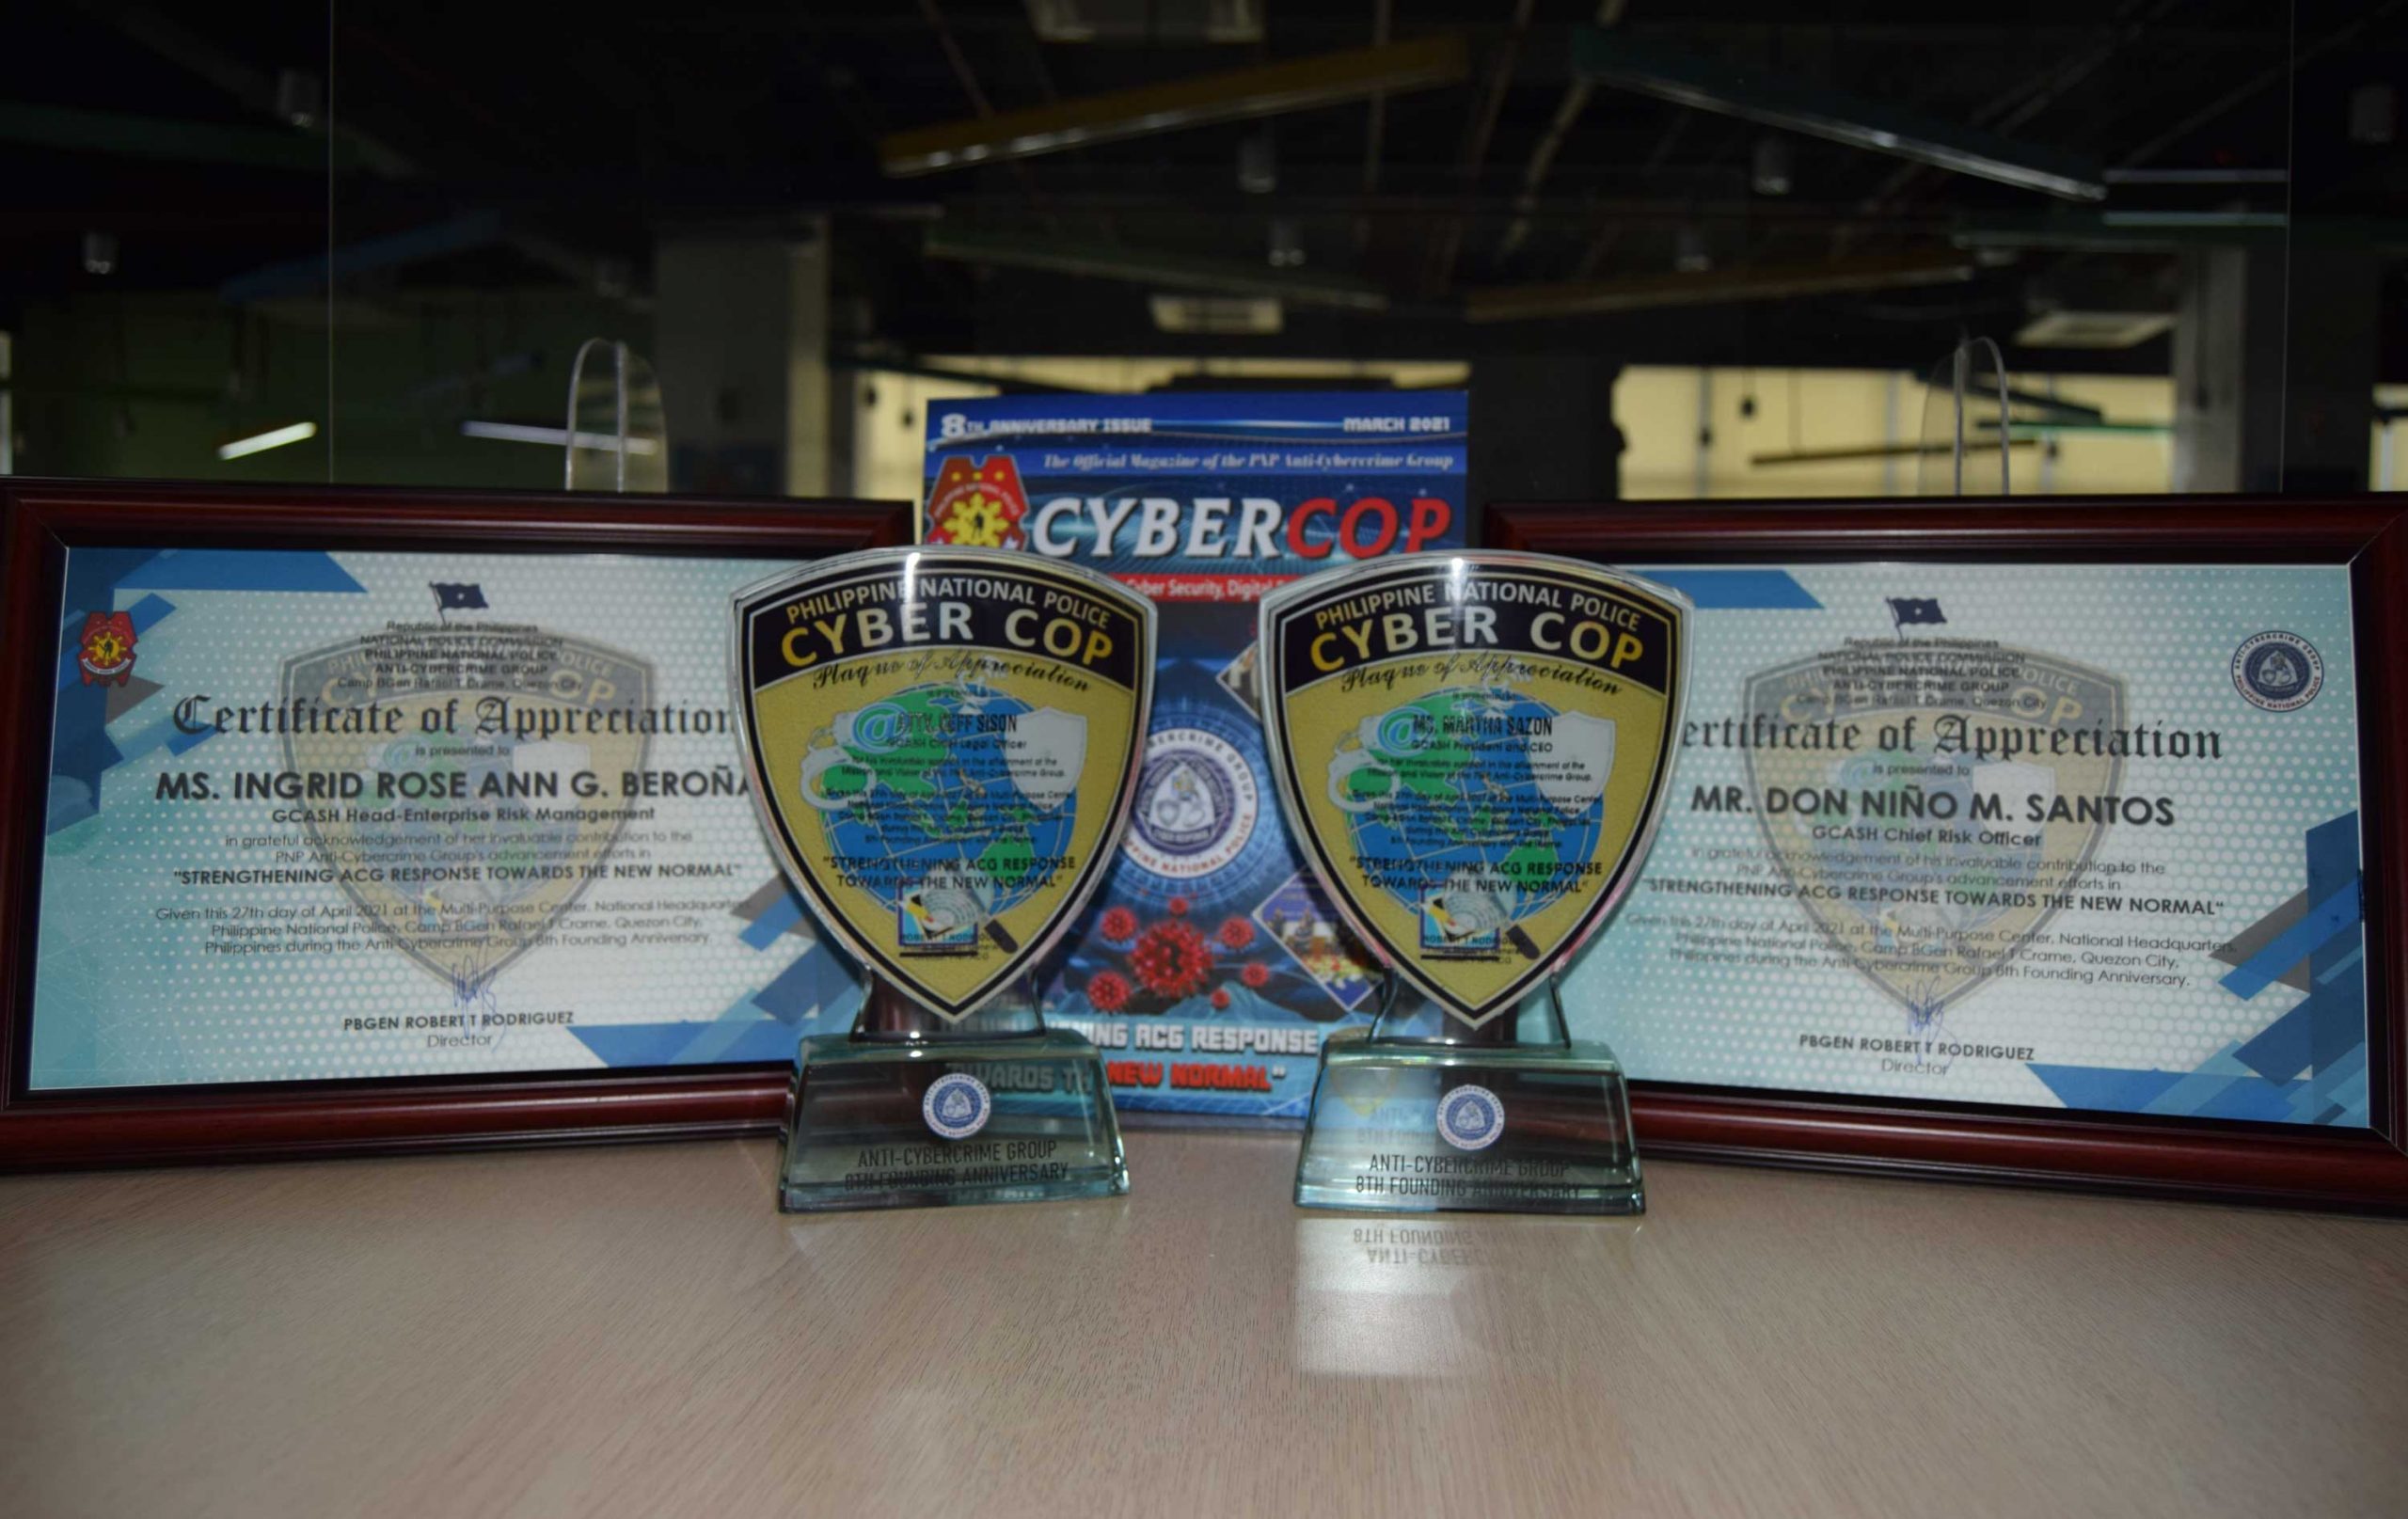 GCash recognized by the PNP for “Strengthening ACG Response Towards the New Normal”